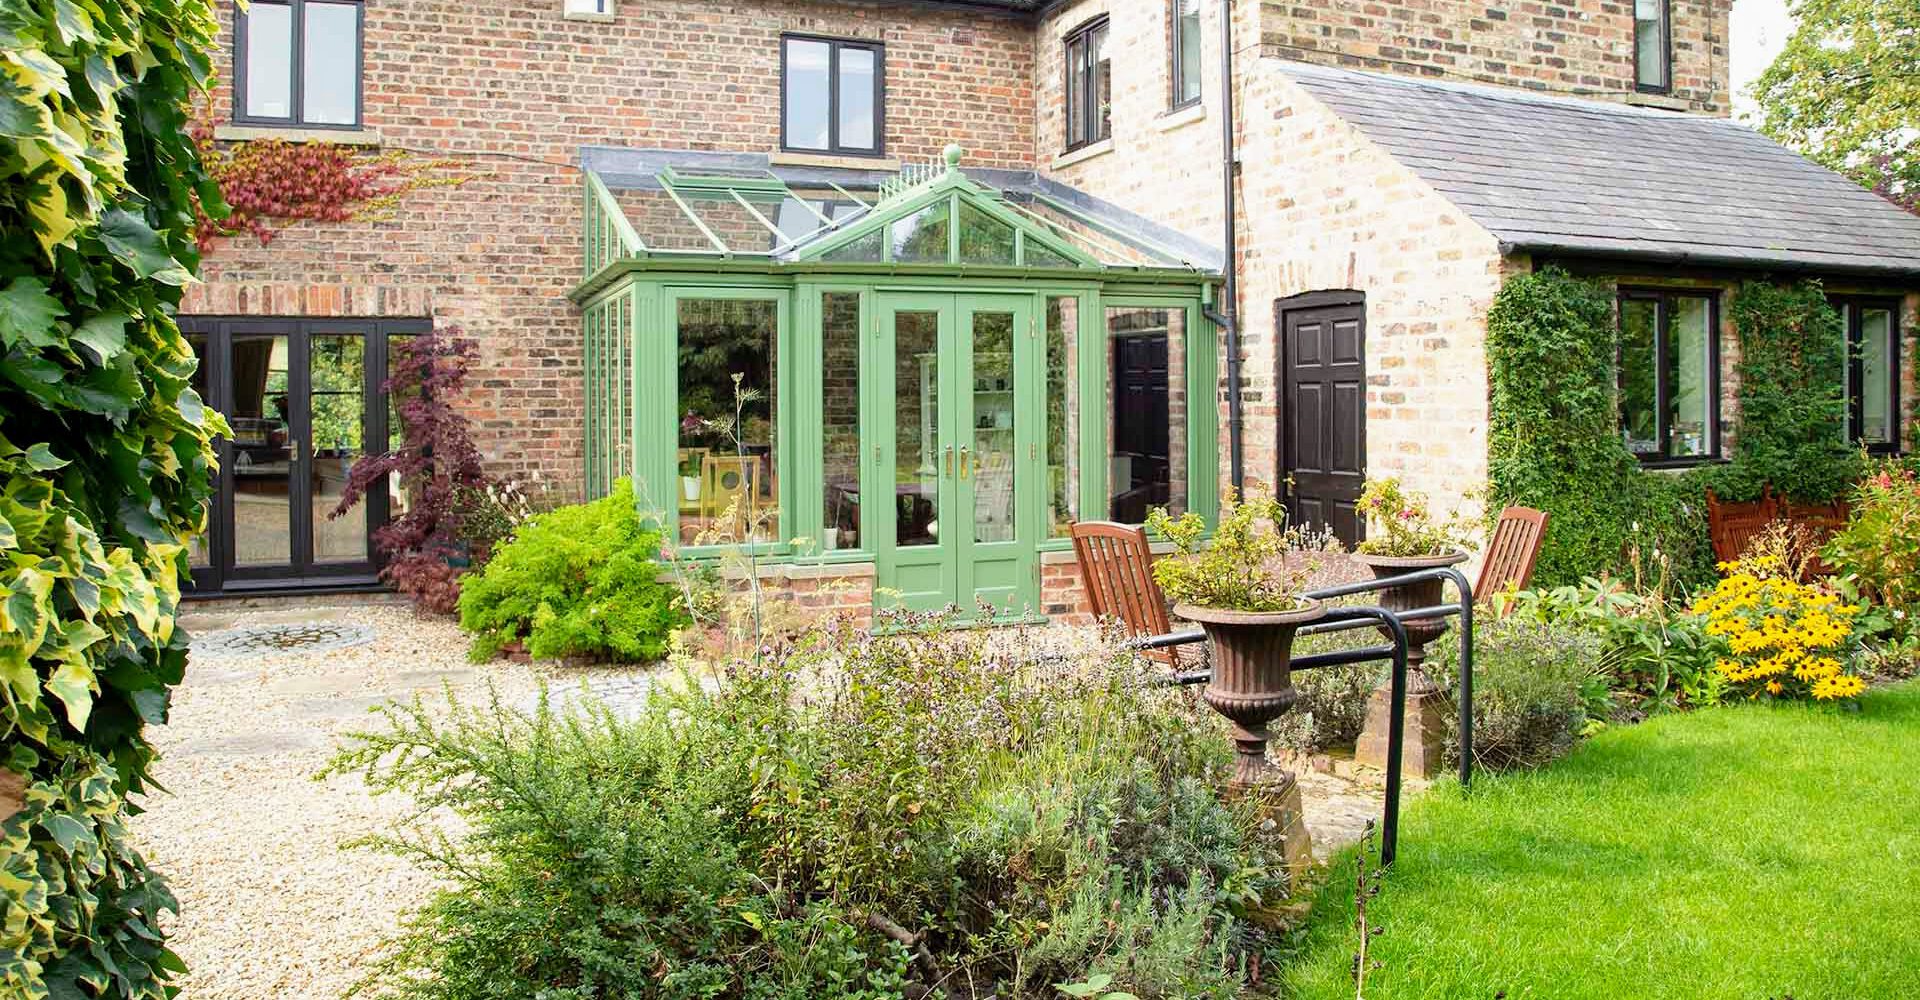 Beautifully repaired traditional timber framed conservatory in stunning back garden